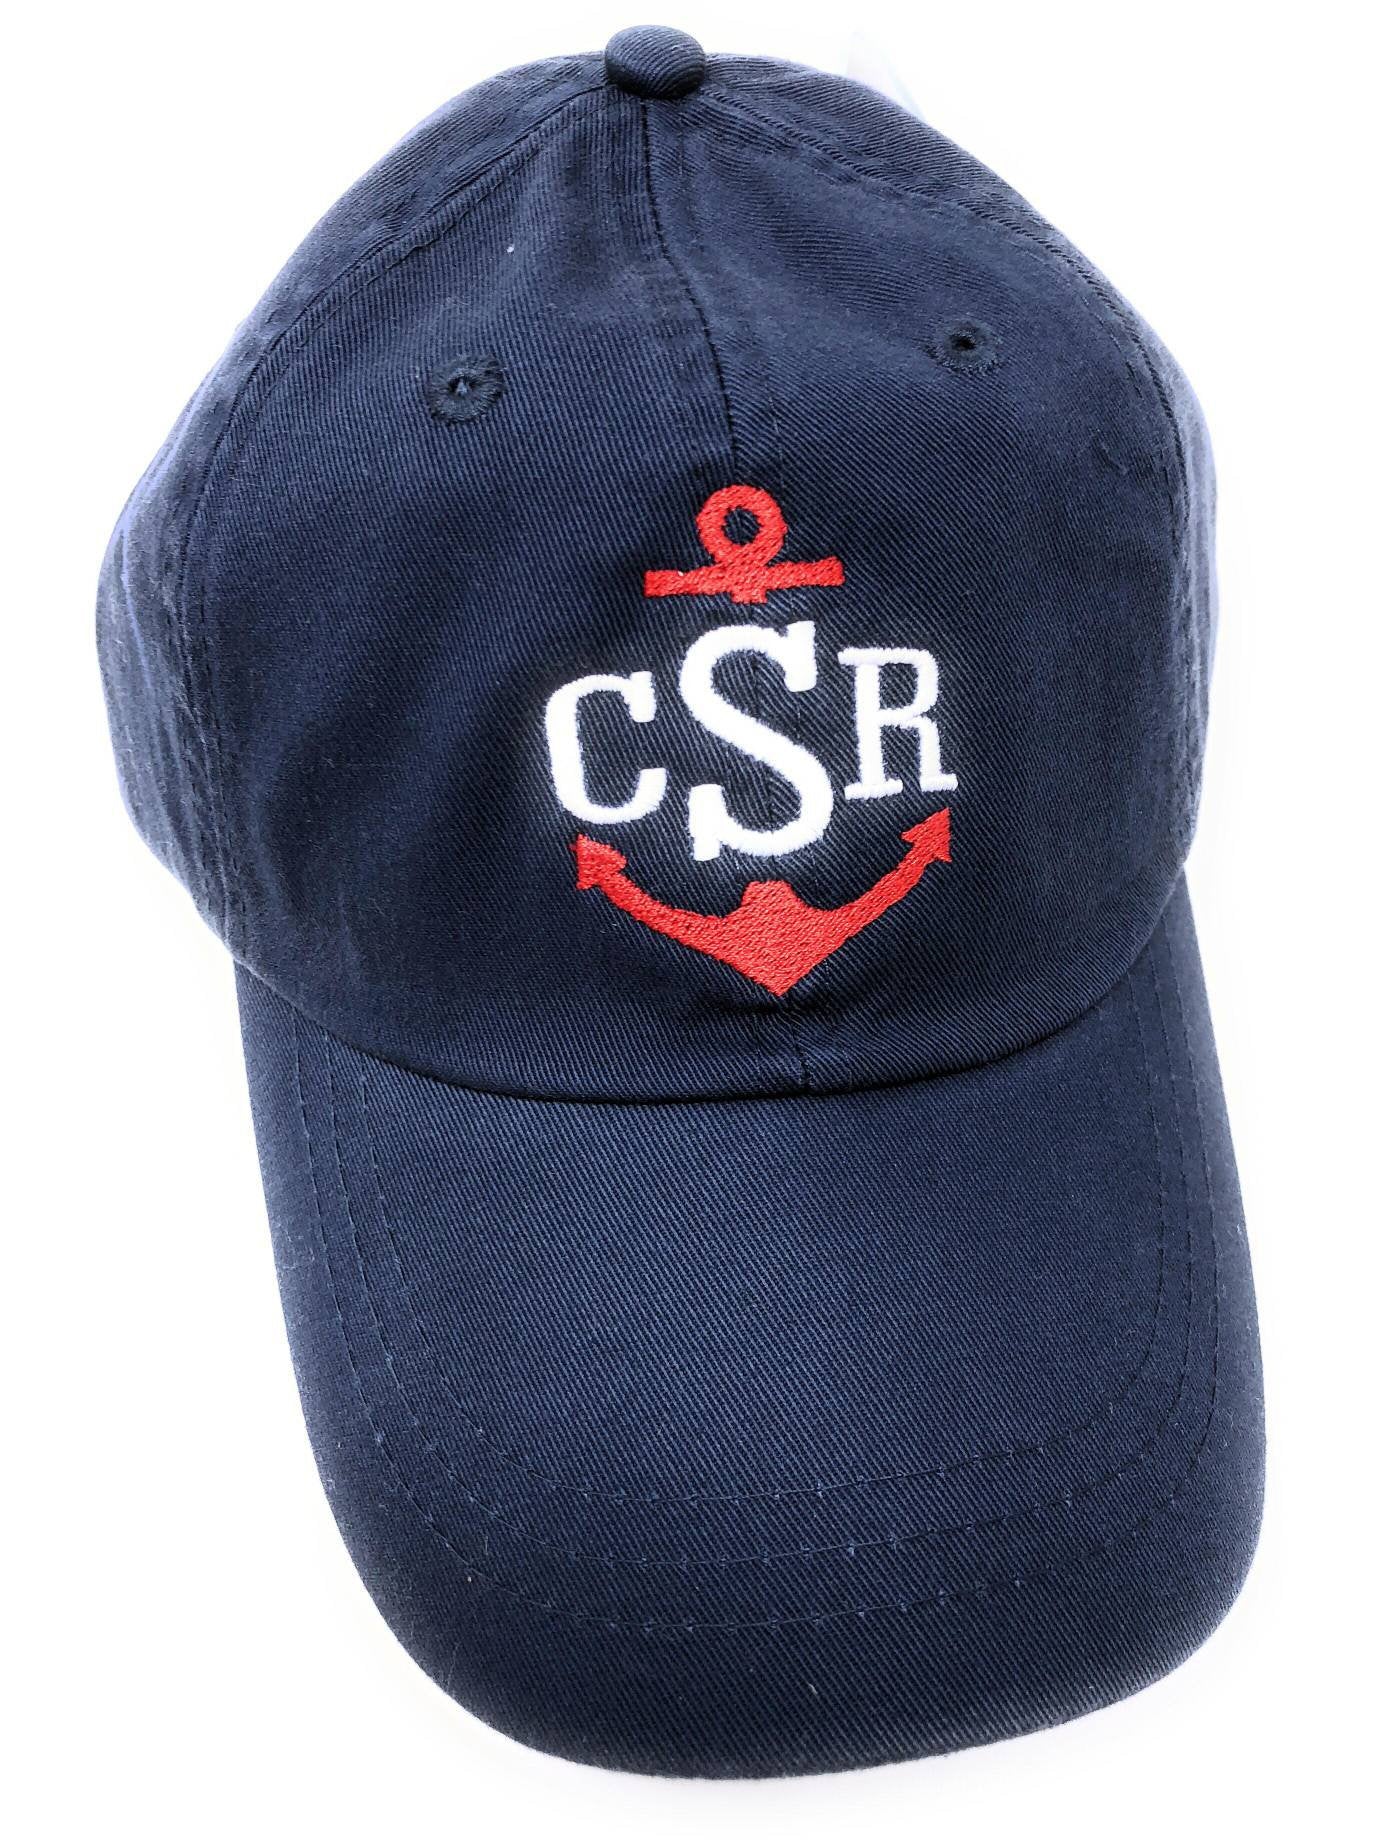 Anchor Monogram Baseball Hat - Baby, Youth, Adult Anchor Hat - Personalized Nautical Hat - Embroidery Monogrammed Anchor Cap